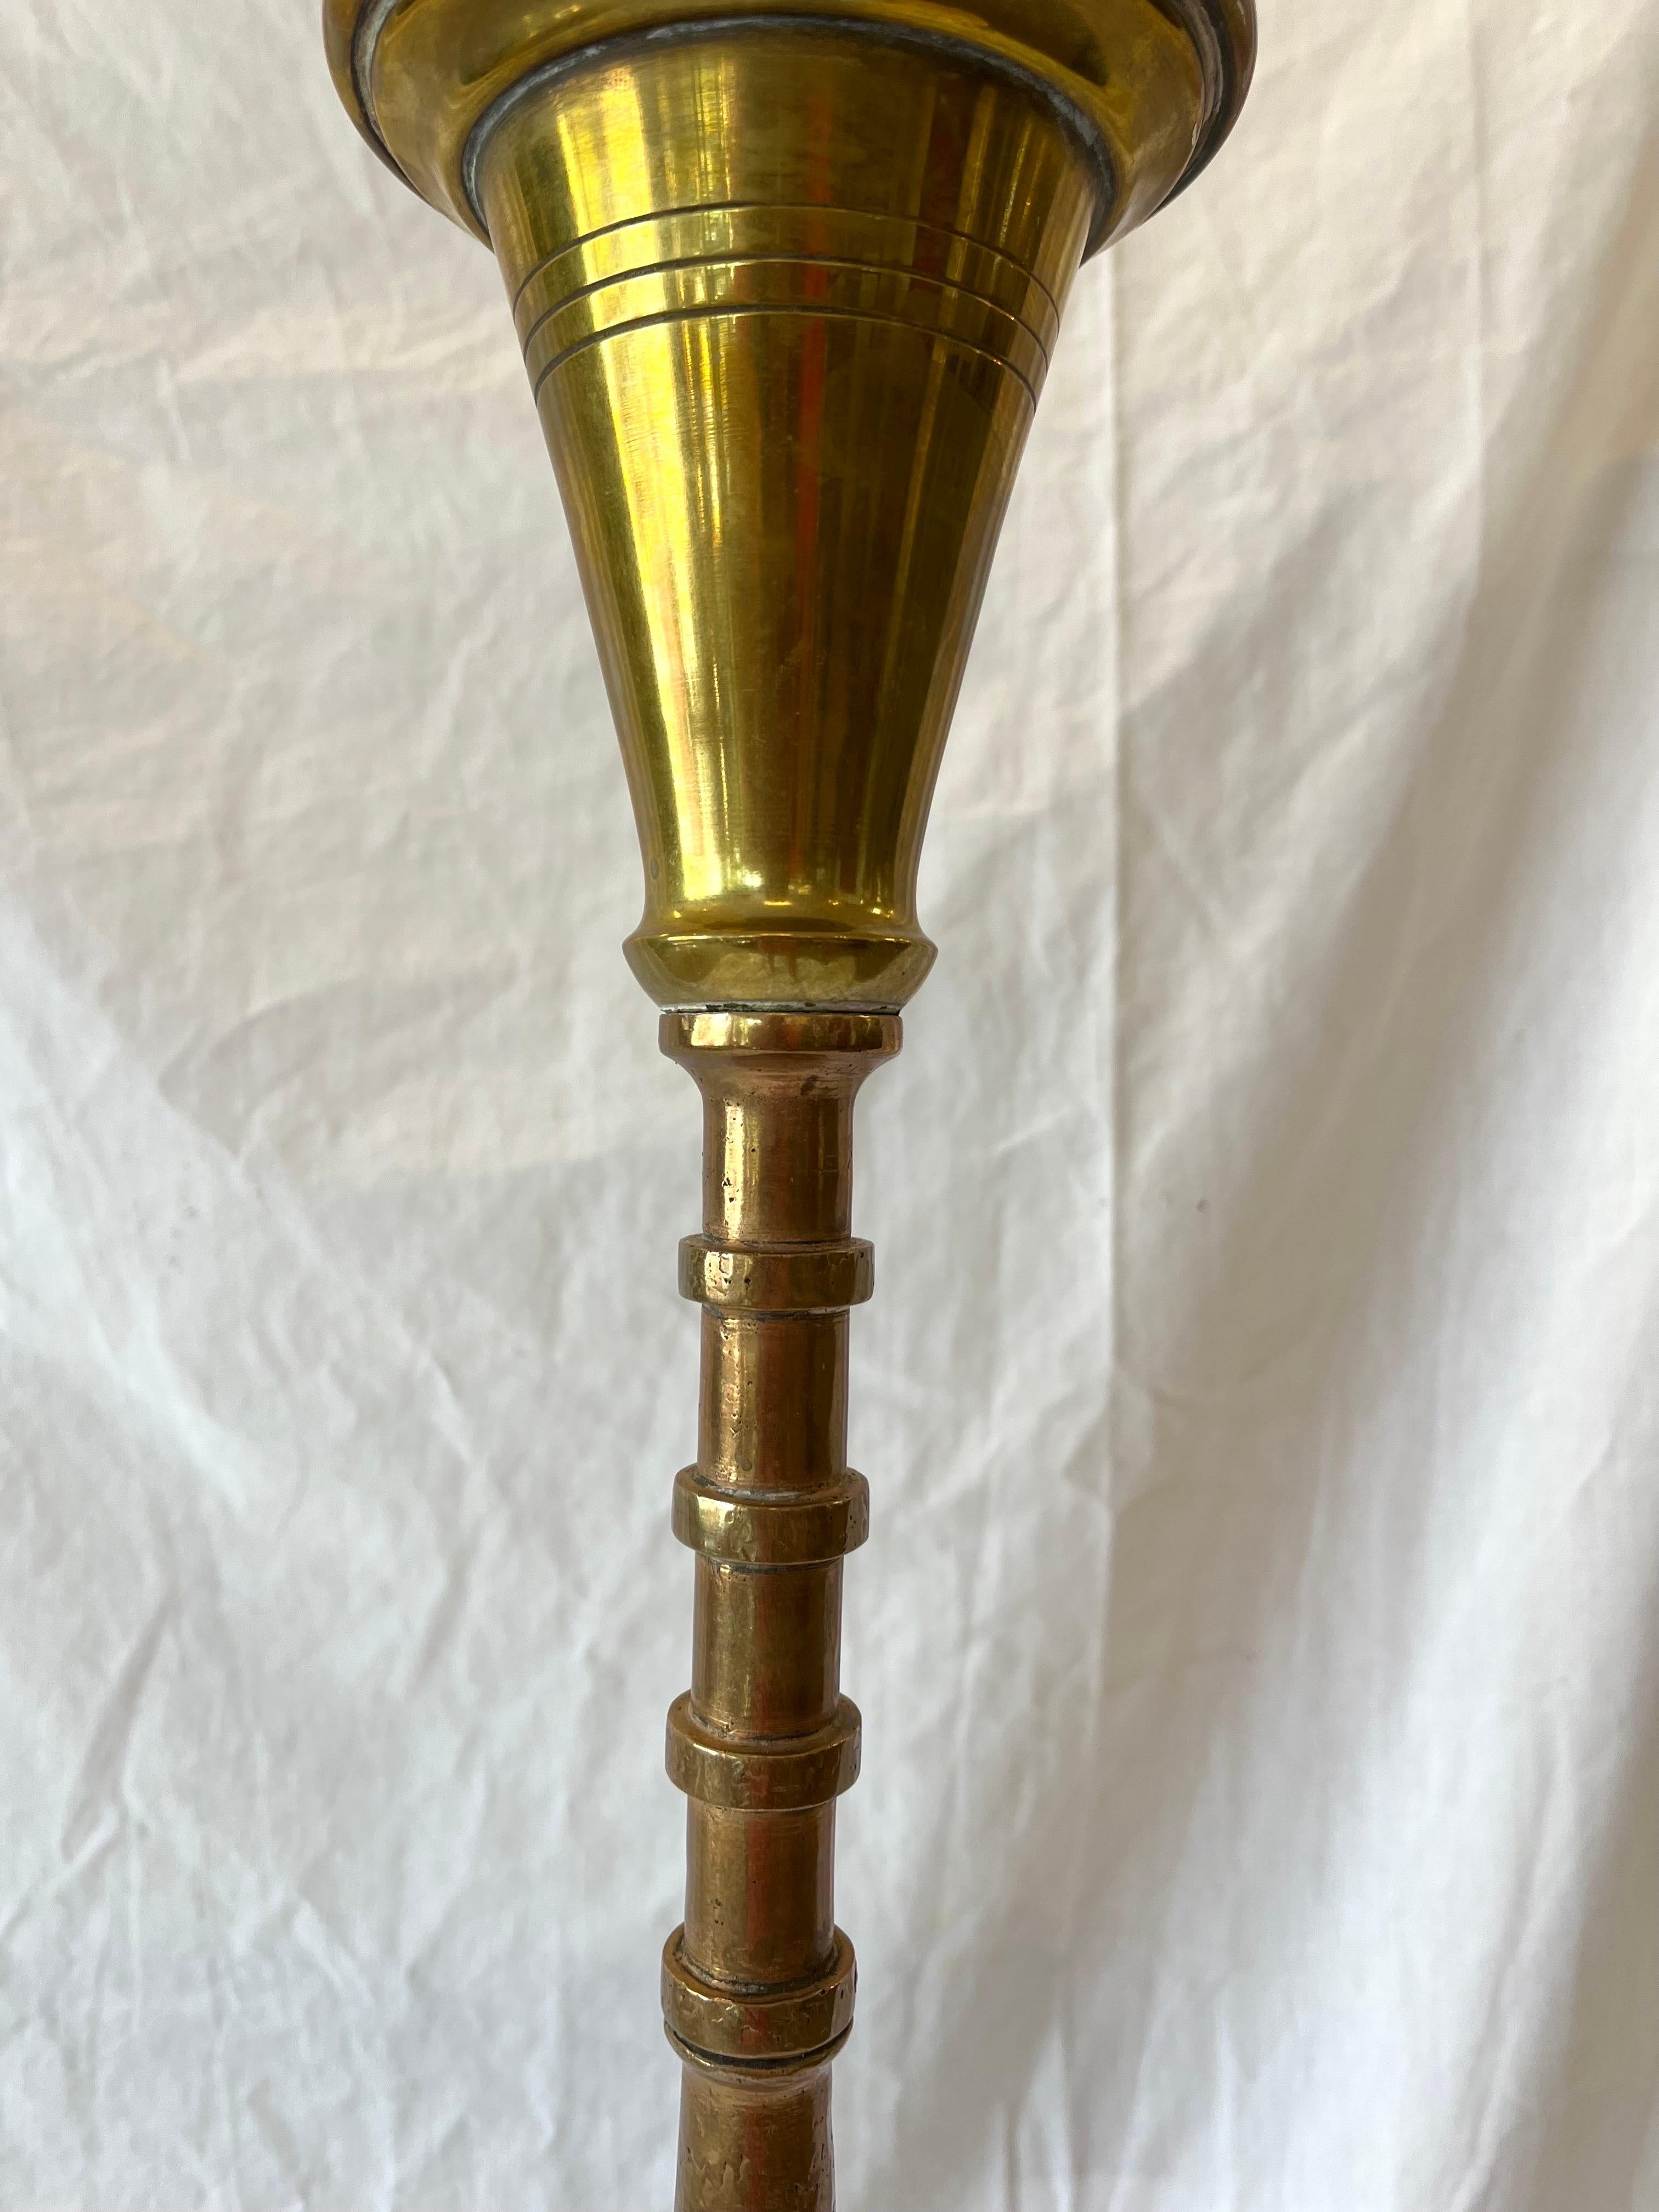 Antique Copper Brass Mixed Metal Ornate Moorish Style Hand Crafted Floor Lamp In Good Condition For Sale In Atlanta, GA